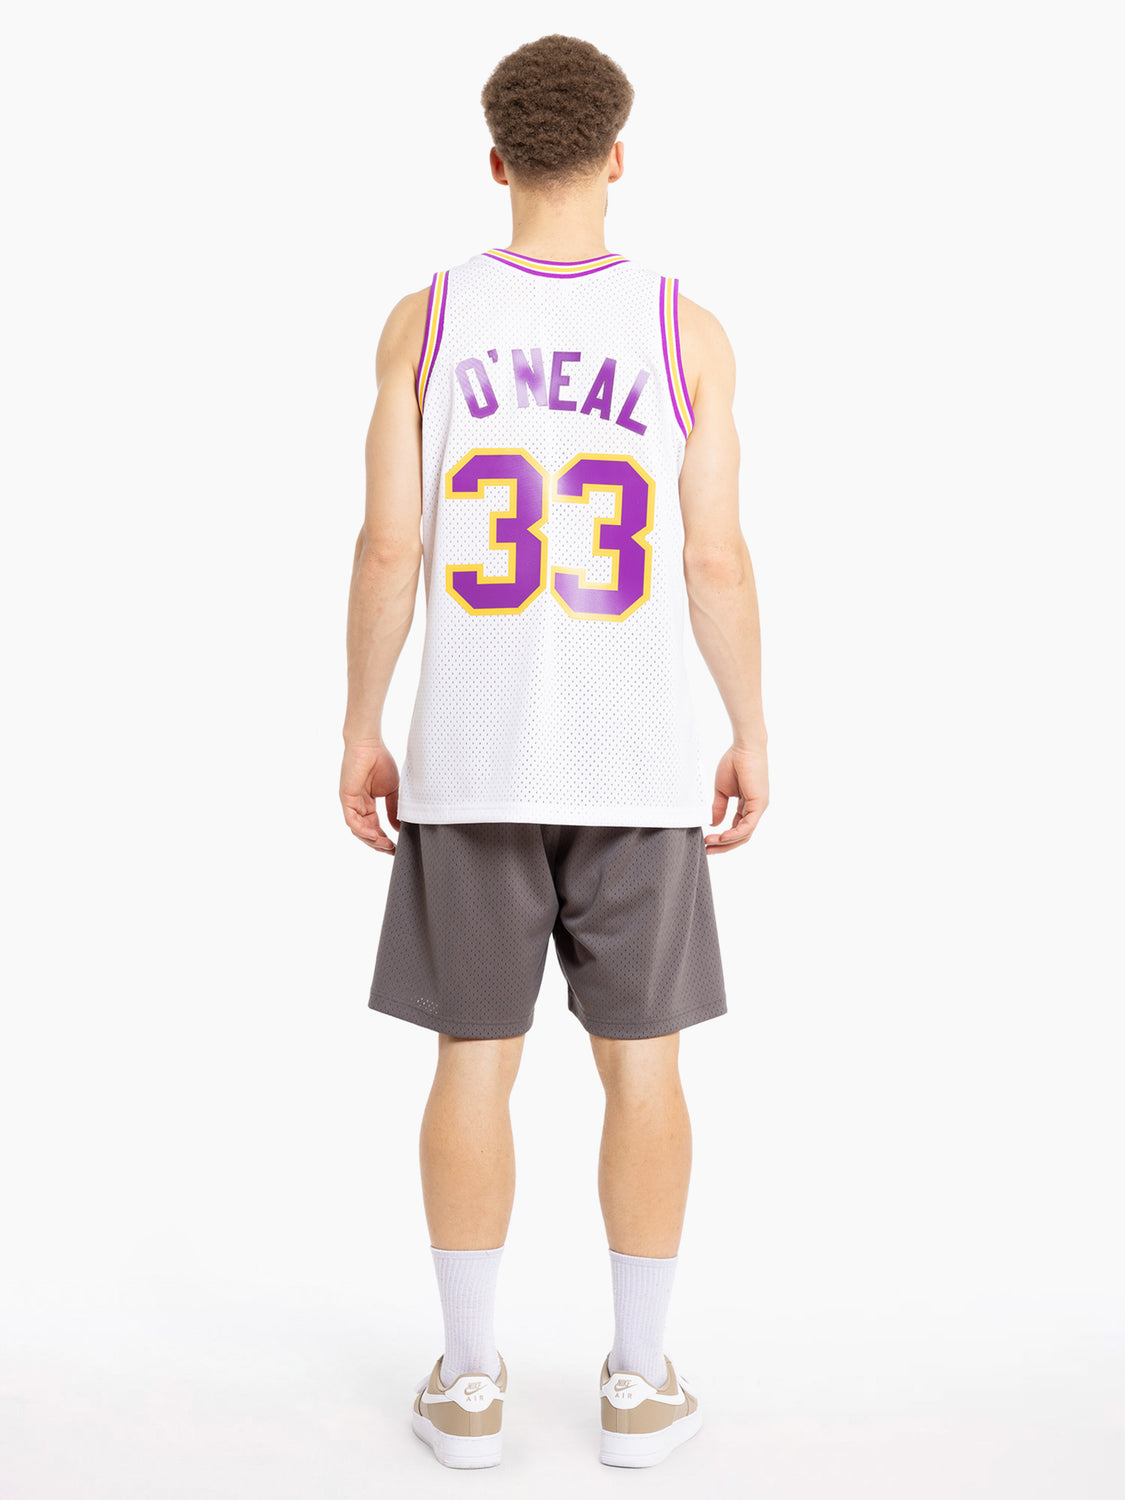 Mitchell & Ness Men's LSU Tigers Shaquille O'Neal #33 Gold 1990-91 Swingman  Replica Throwback Jersey